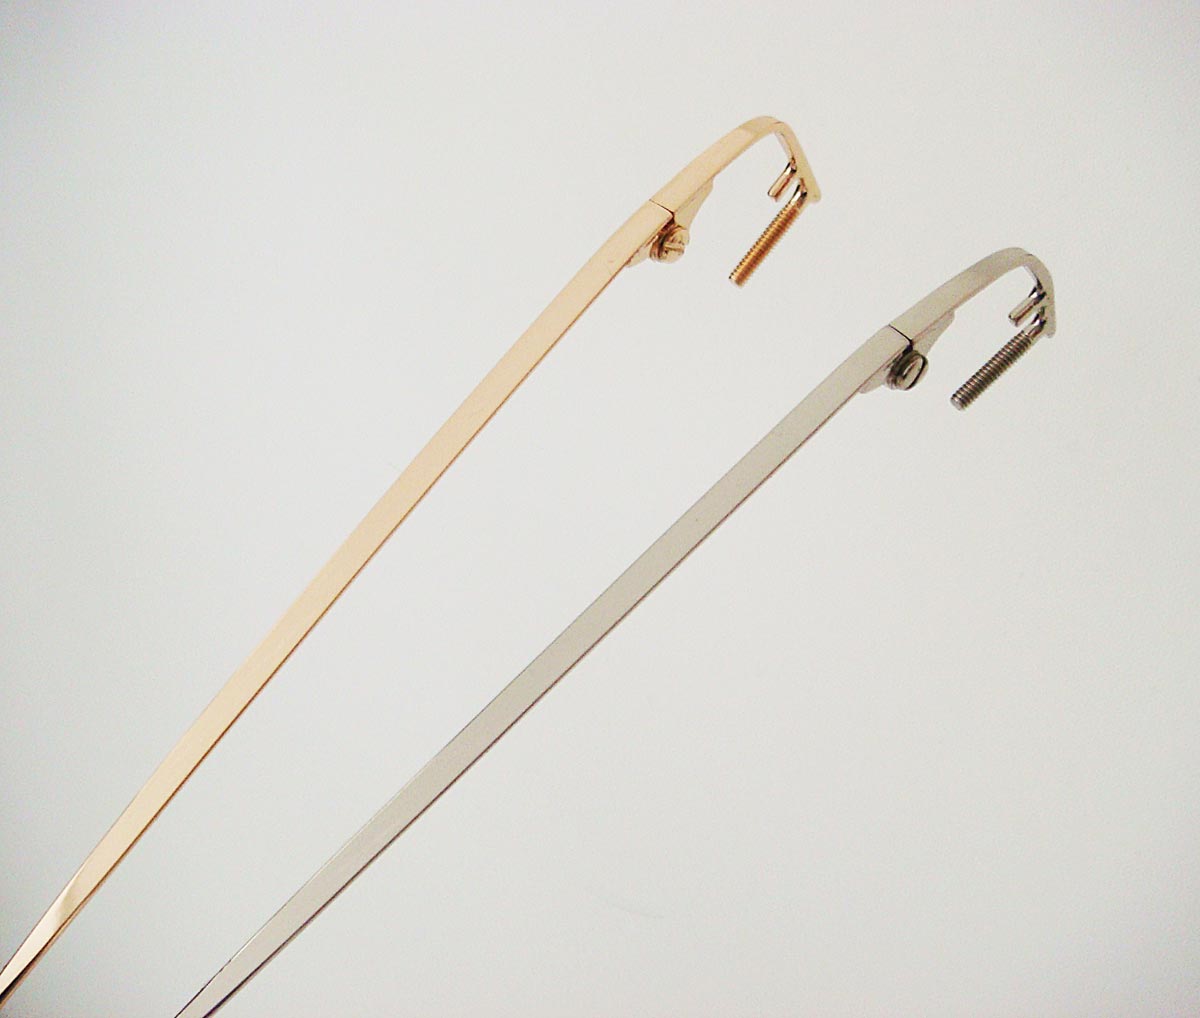 143mm arms for rimless eyewear screw on with arm covers